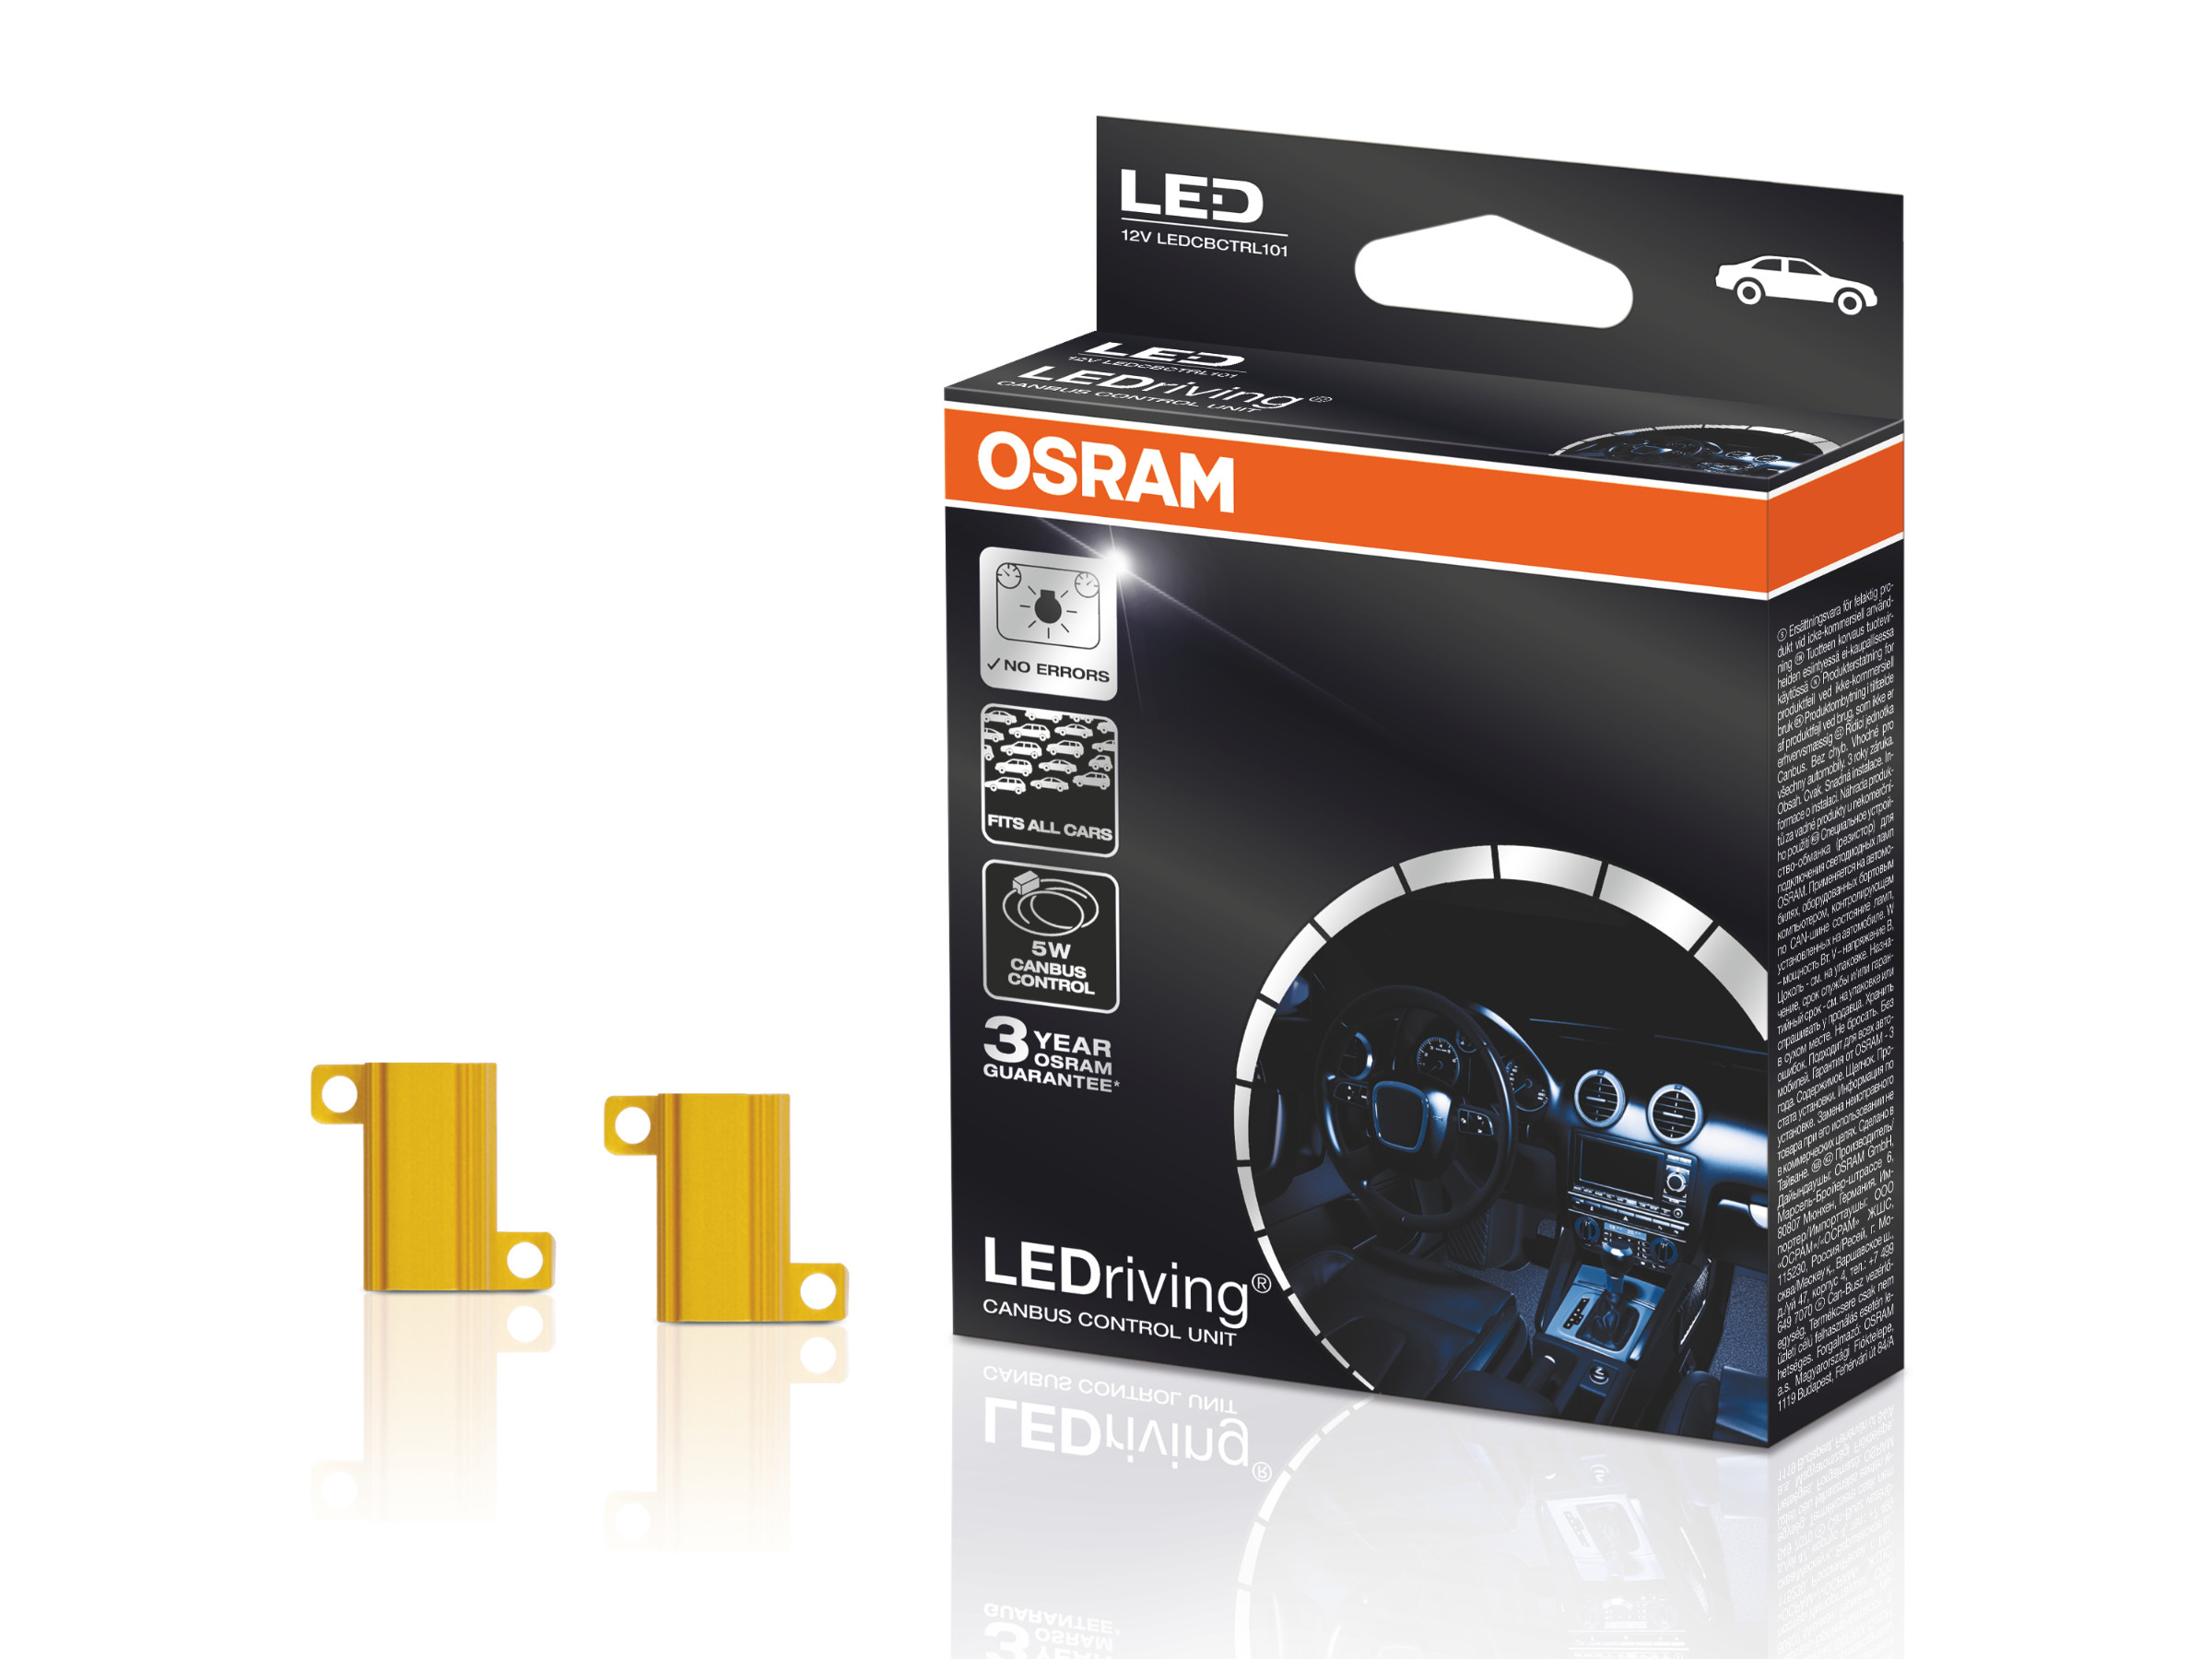 OSRAM LEDriving® 5W CAN-Bus Check Control Widerstand Lastwidersand -  LEDCBCTRL101